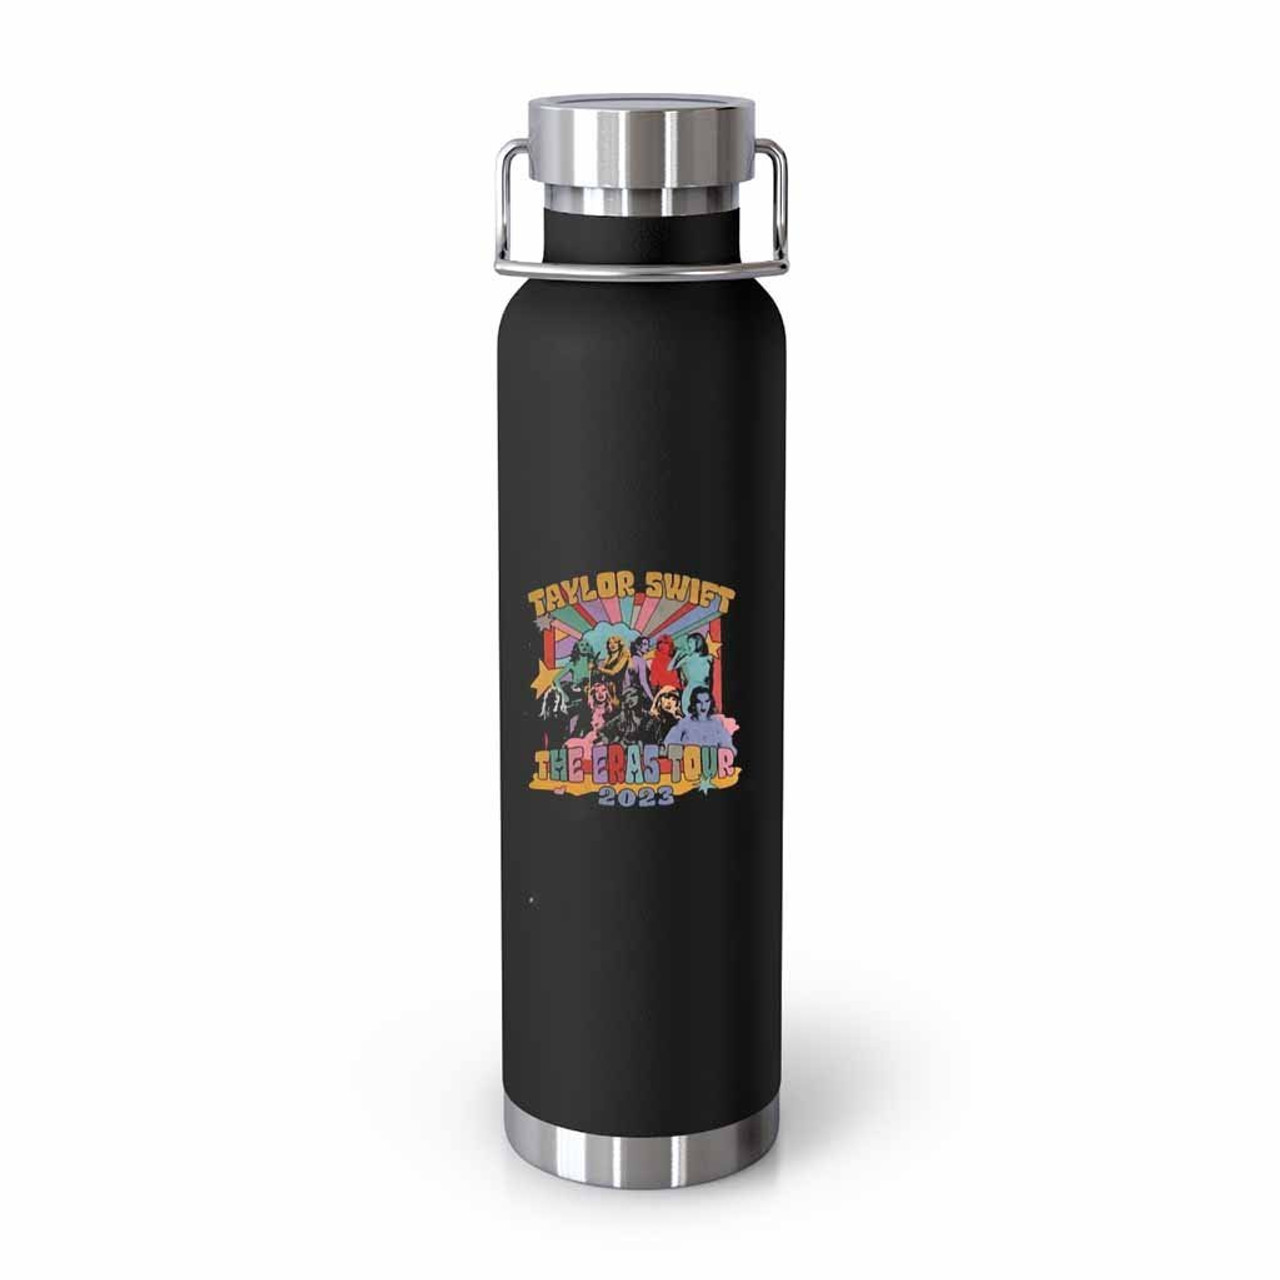 The Eras Tour Two Sided Taylor Swift Tumblr Bottle